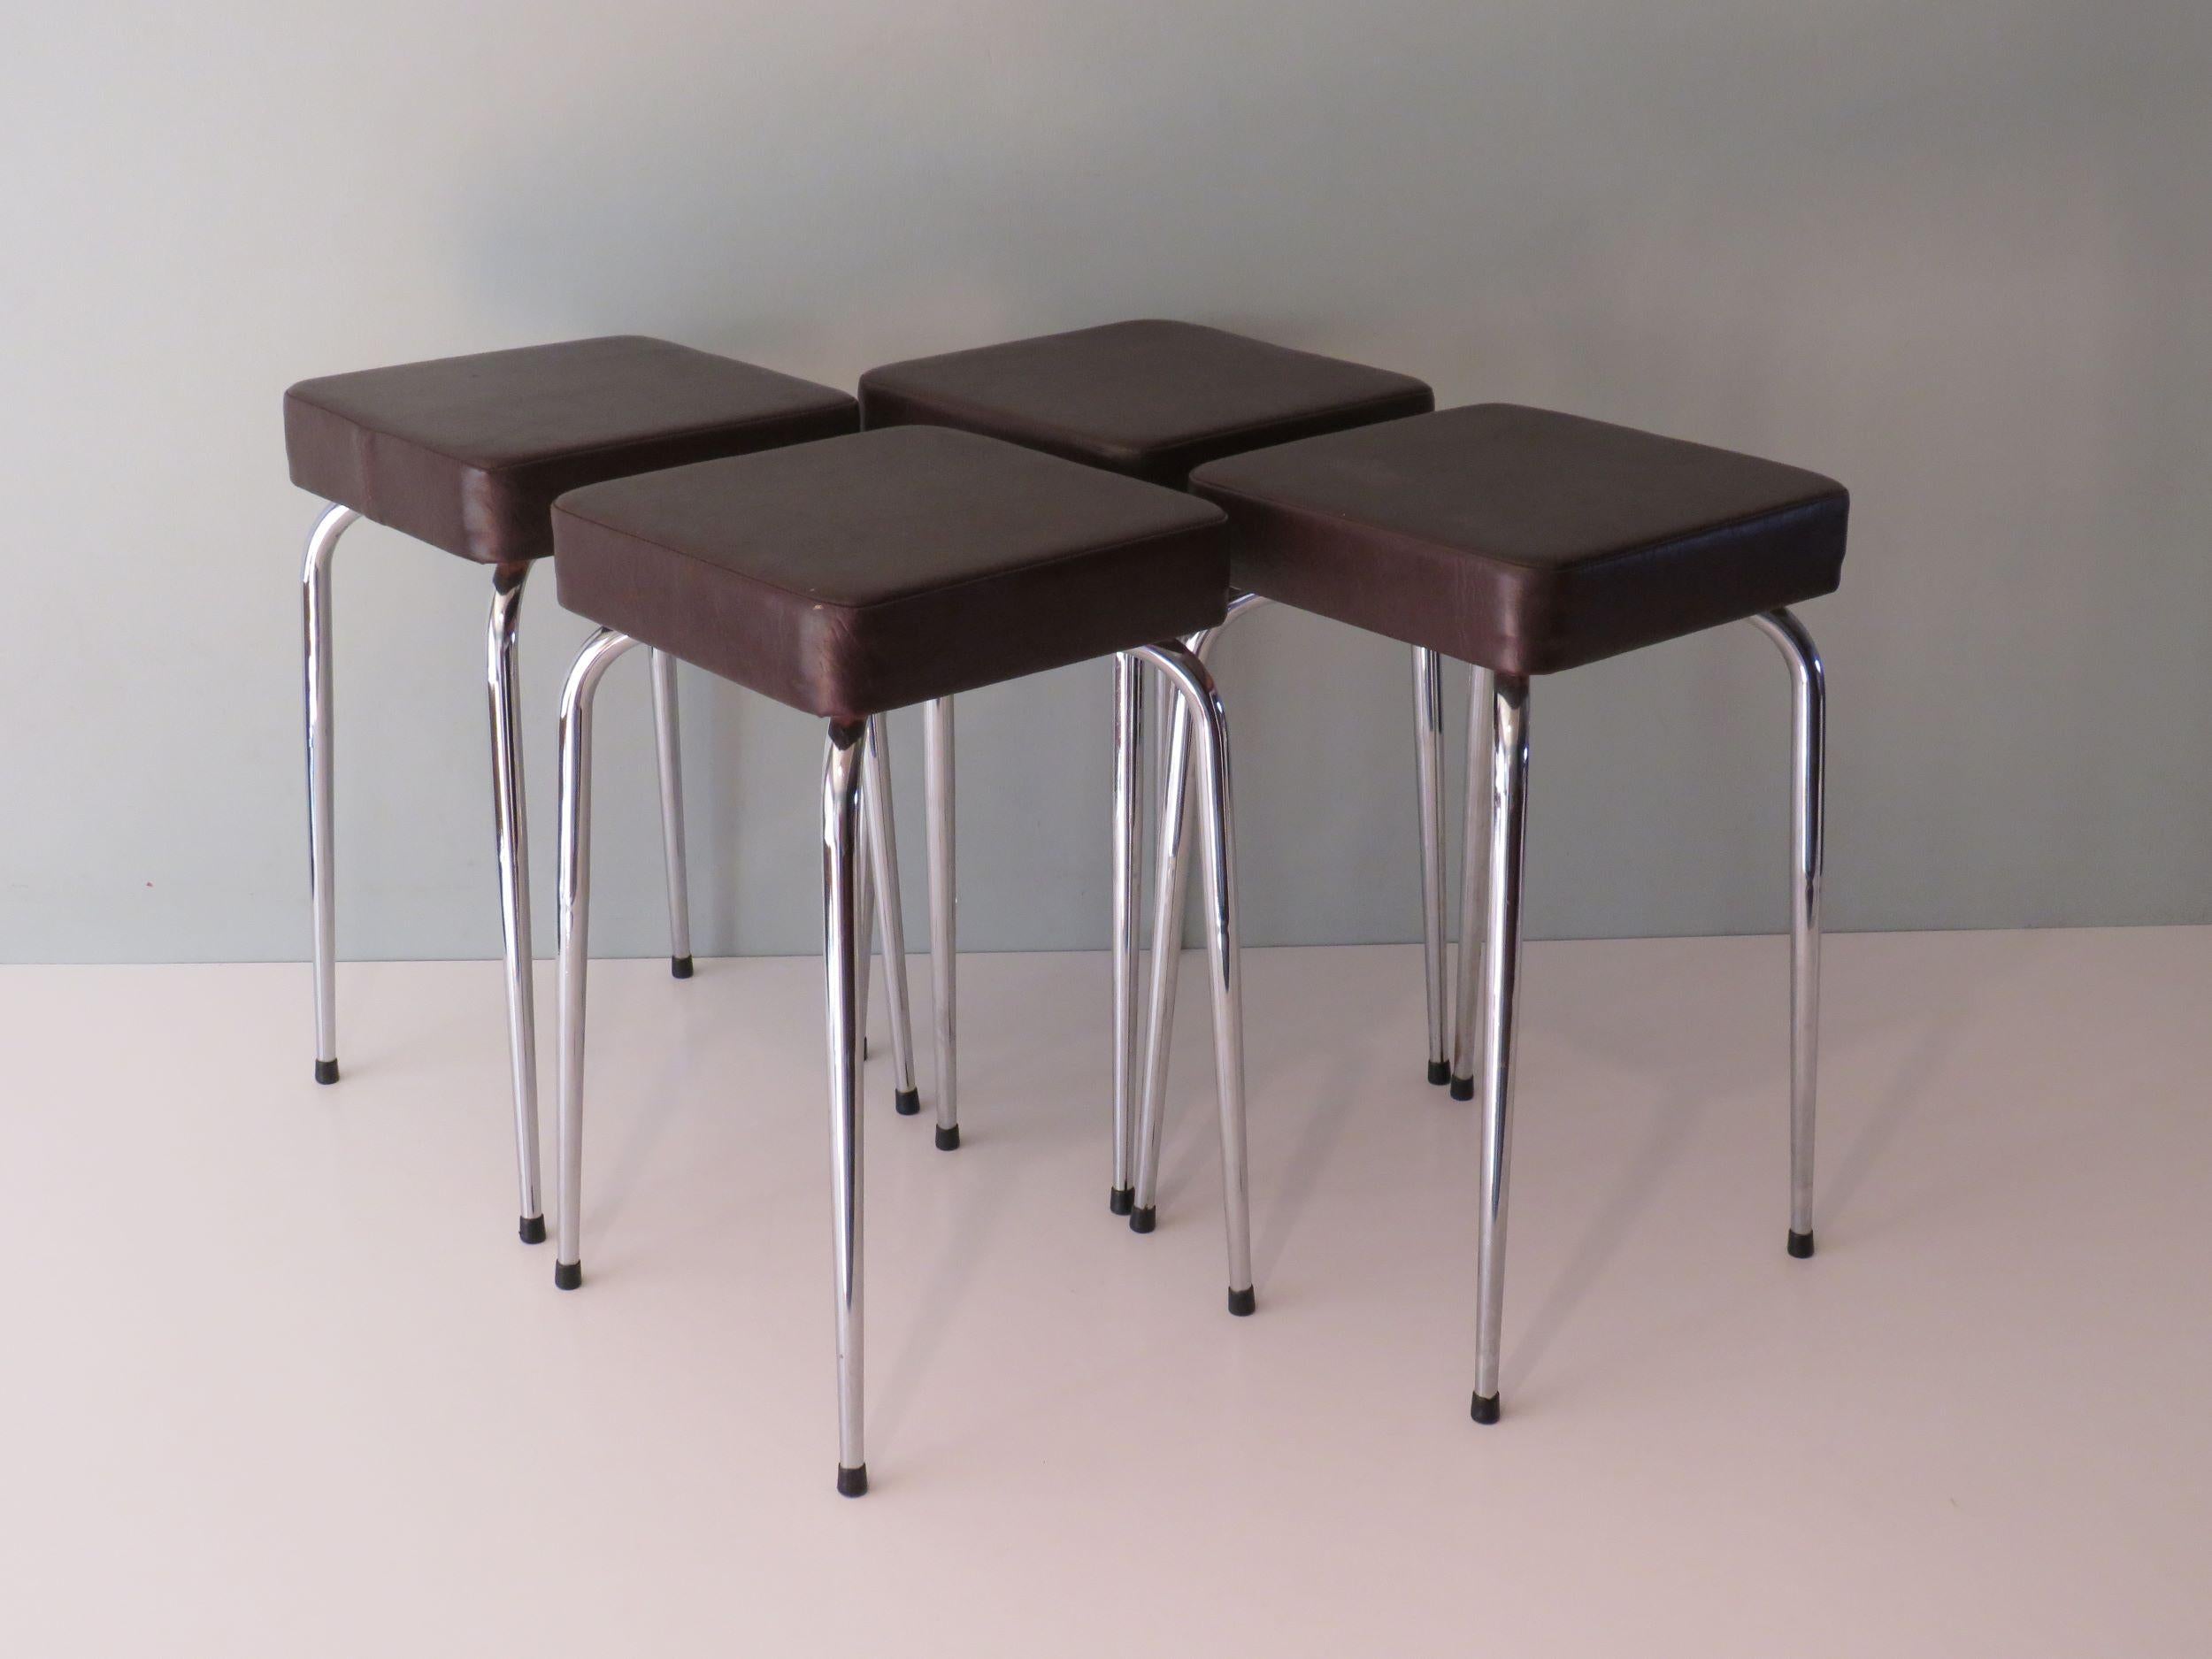 Belgian Set of 4 Stools, Chrome and Skai by Poelux, Belgium, 1960-1970 For Sale